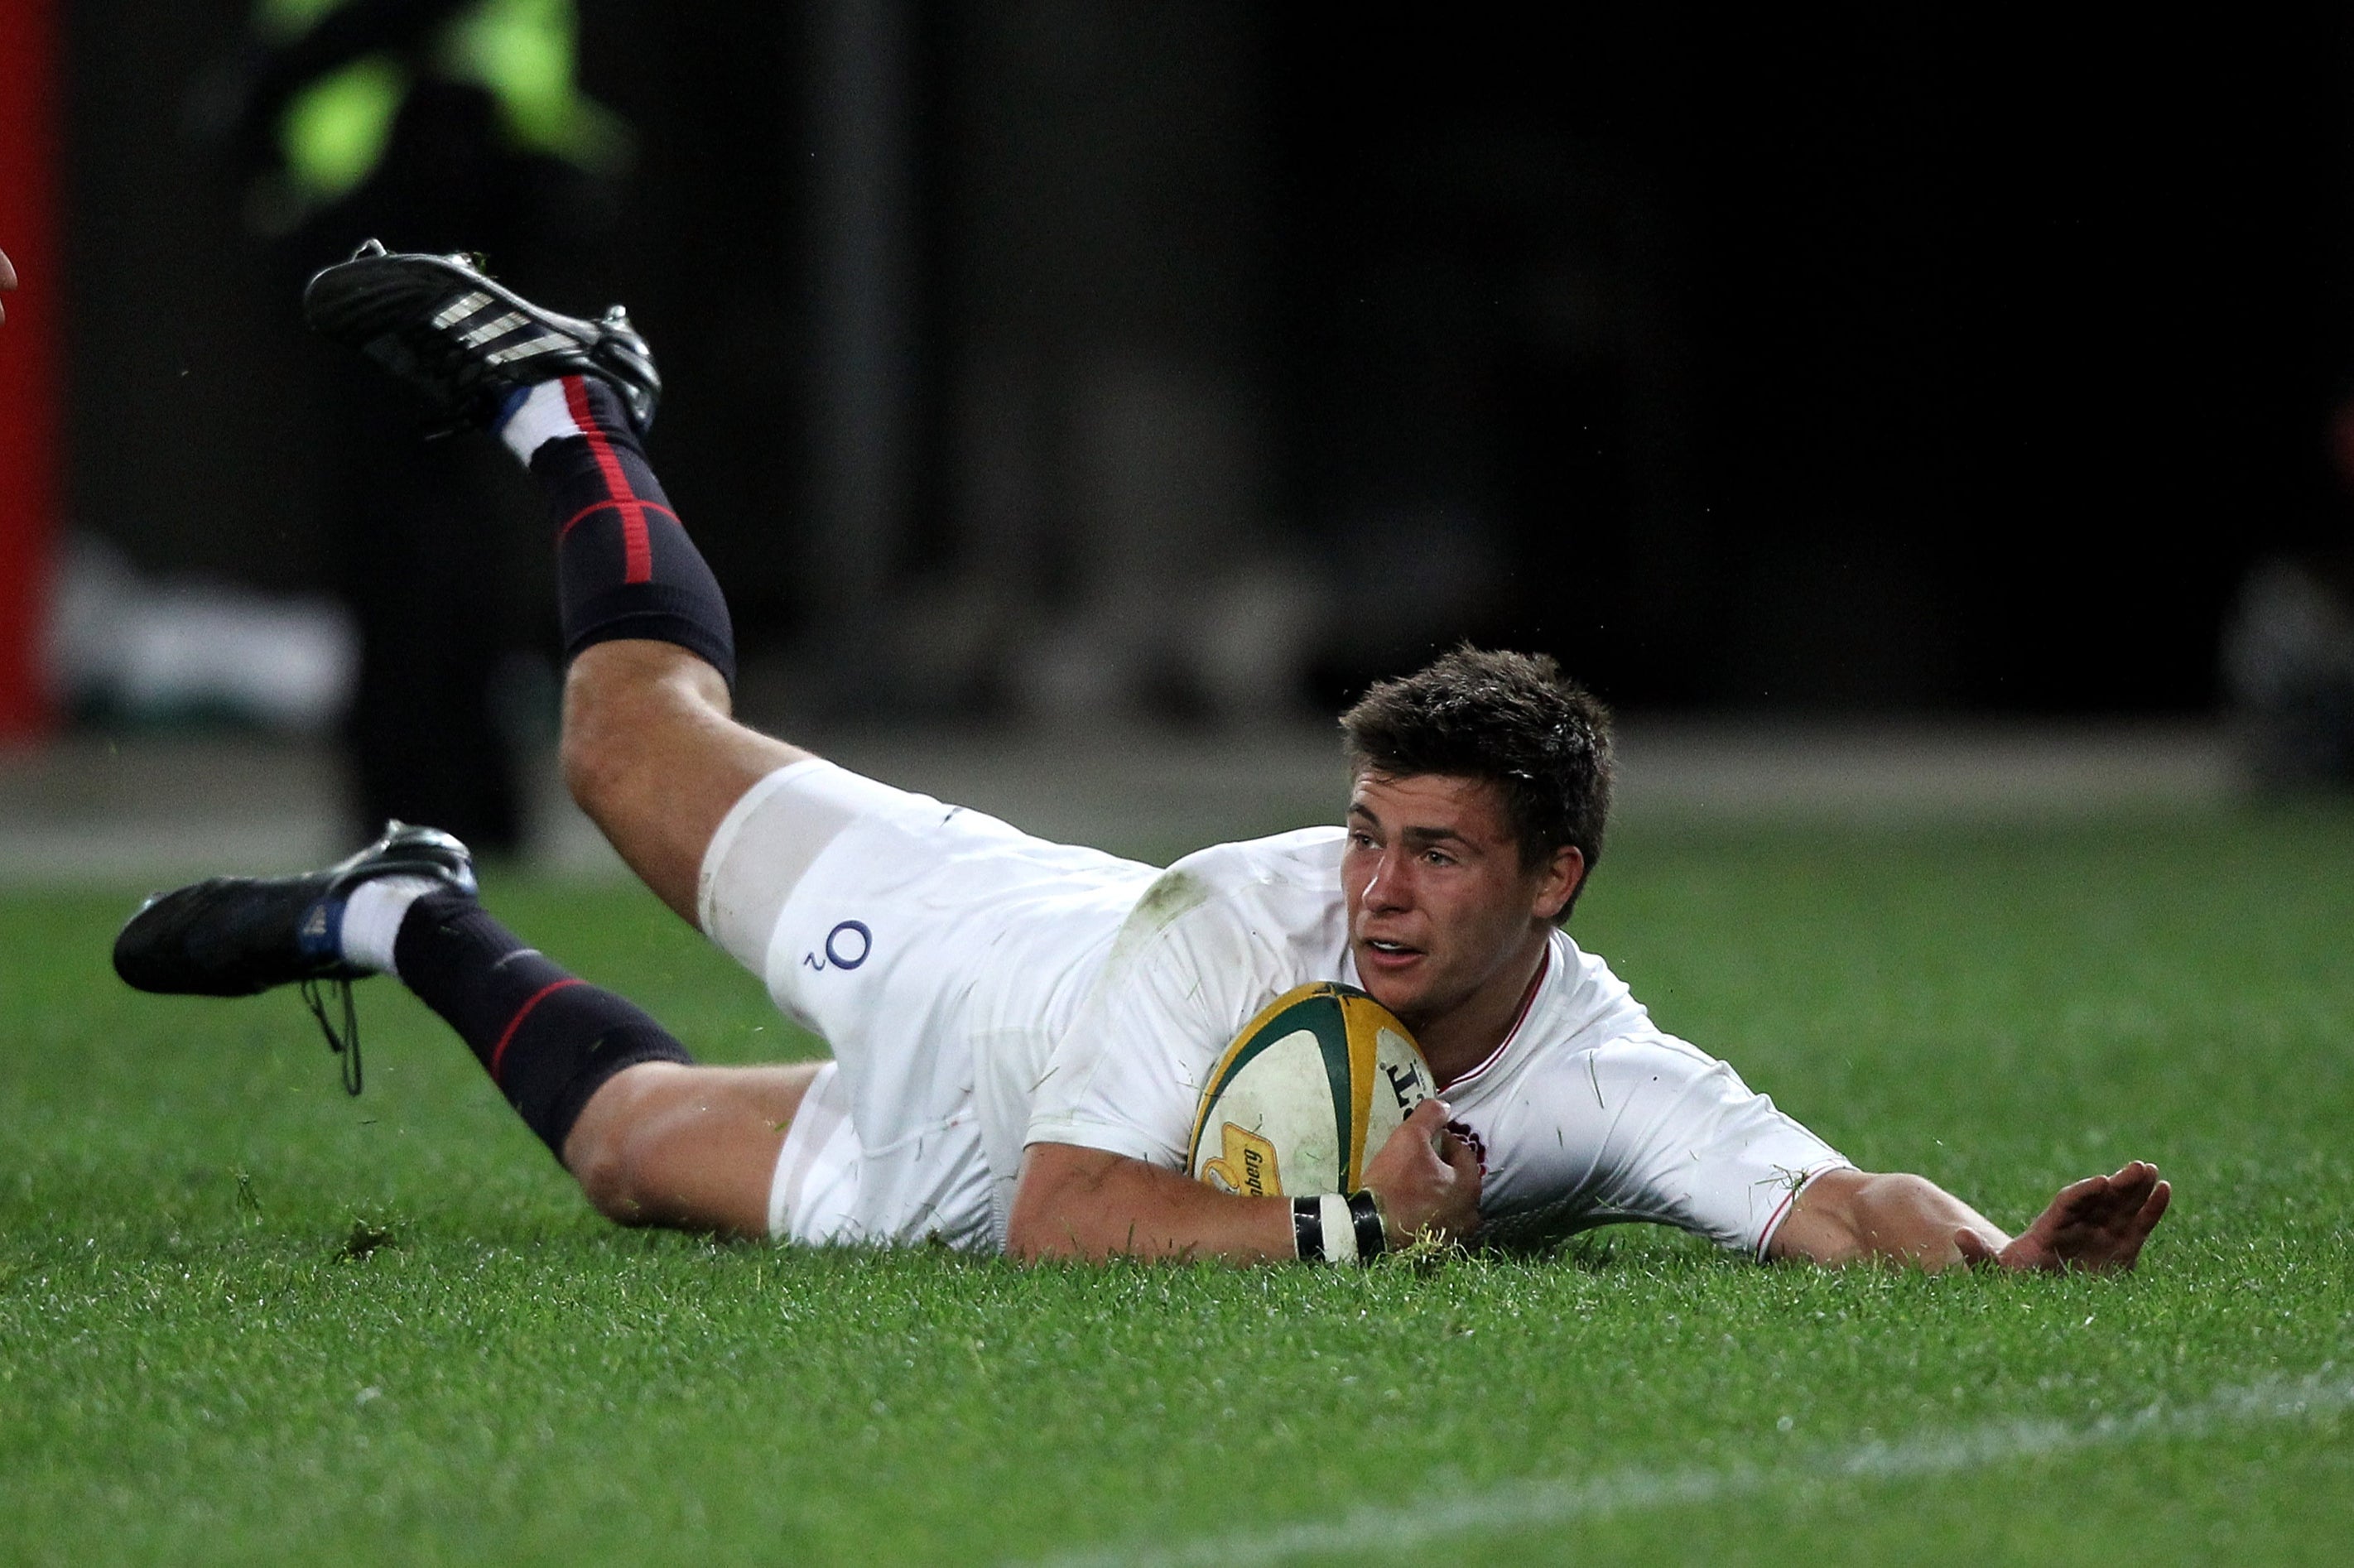 Ben Youngs made his England debut in 2010